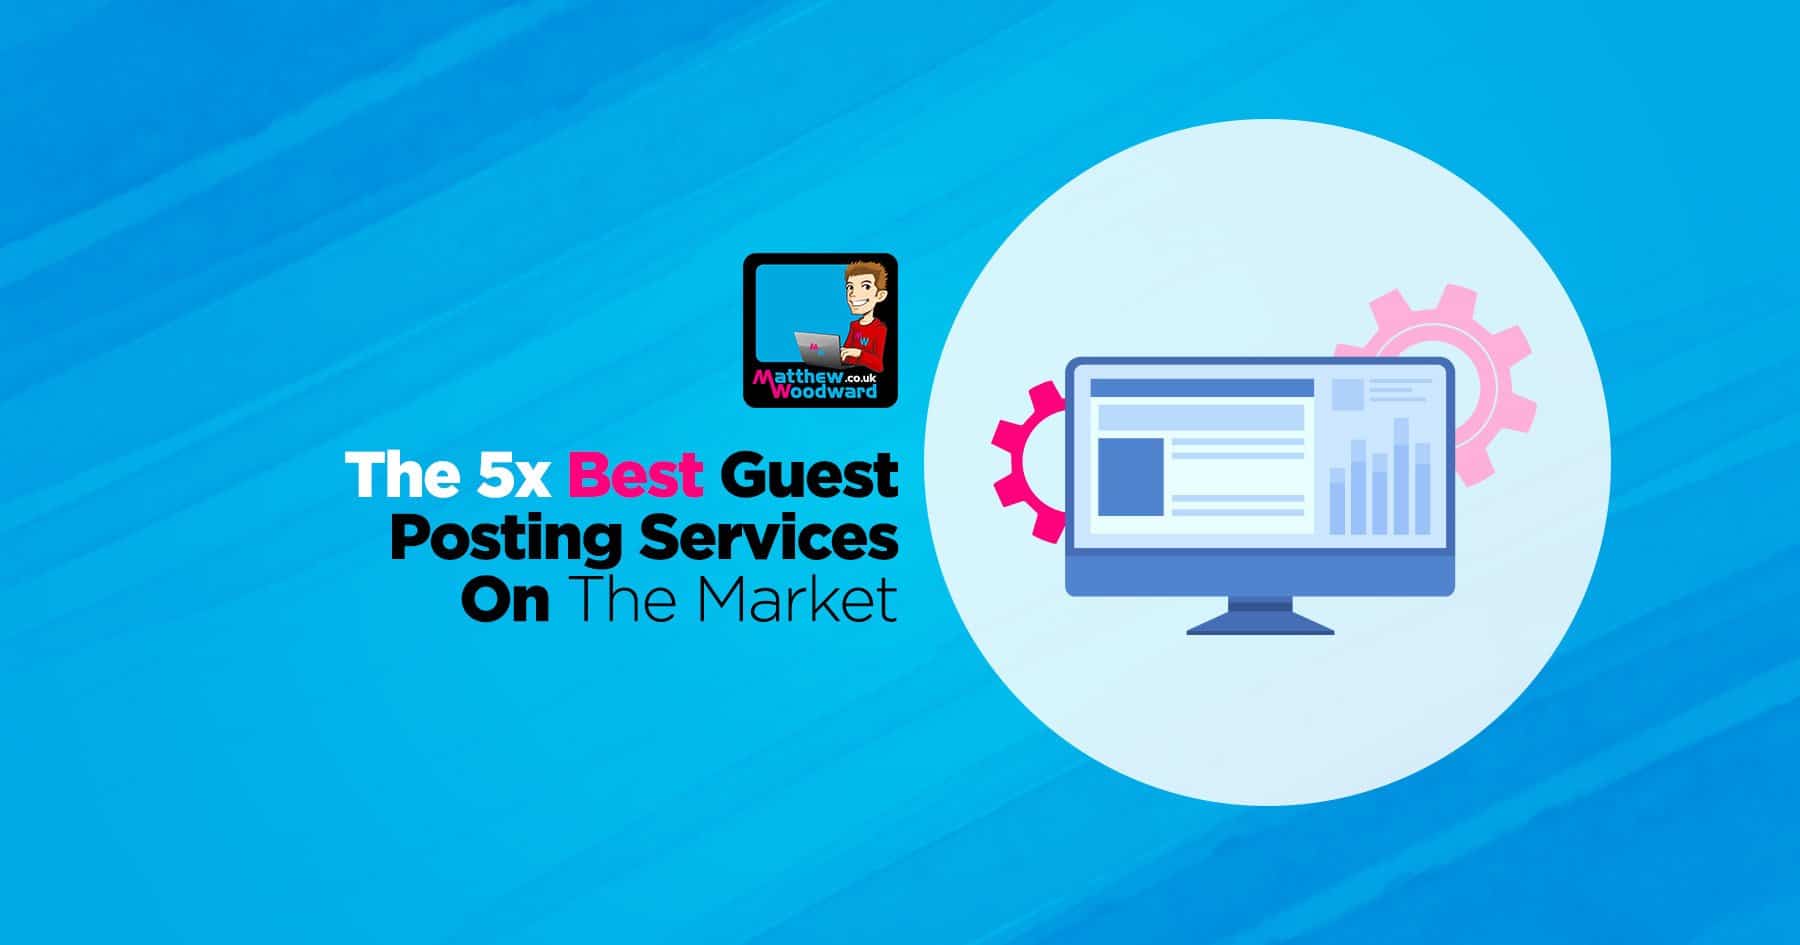 7 Hacks To Hire The Best Guest Posting Service